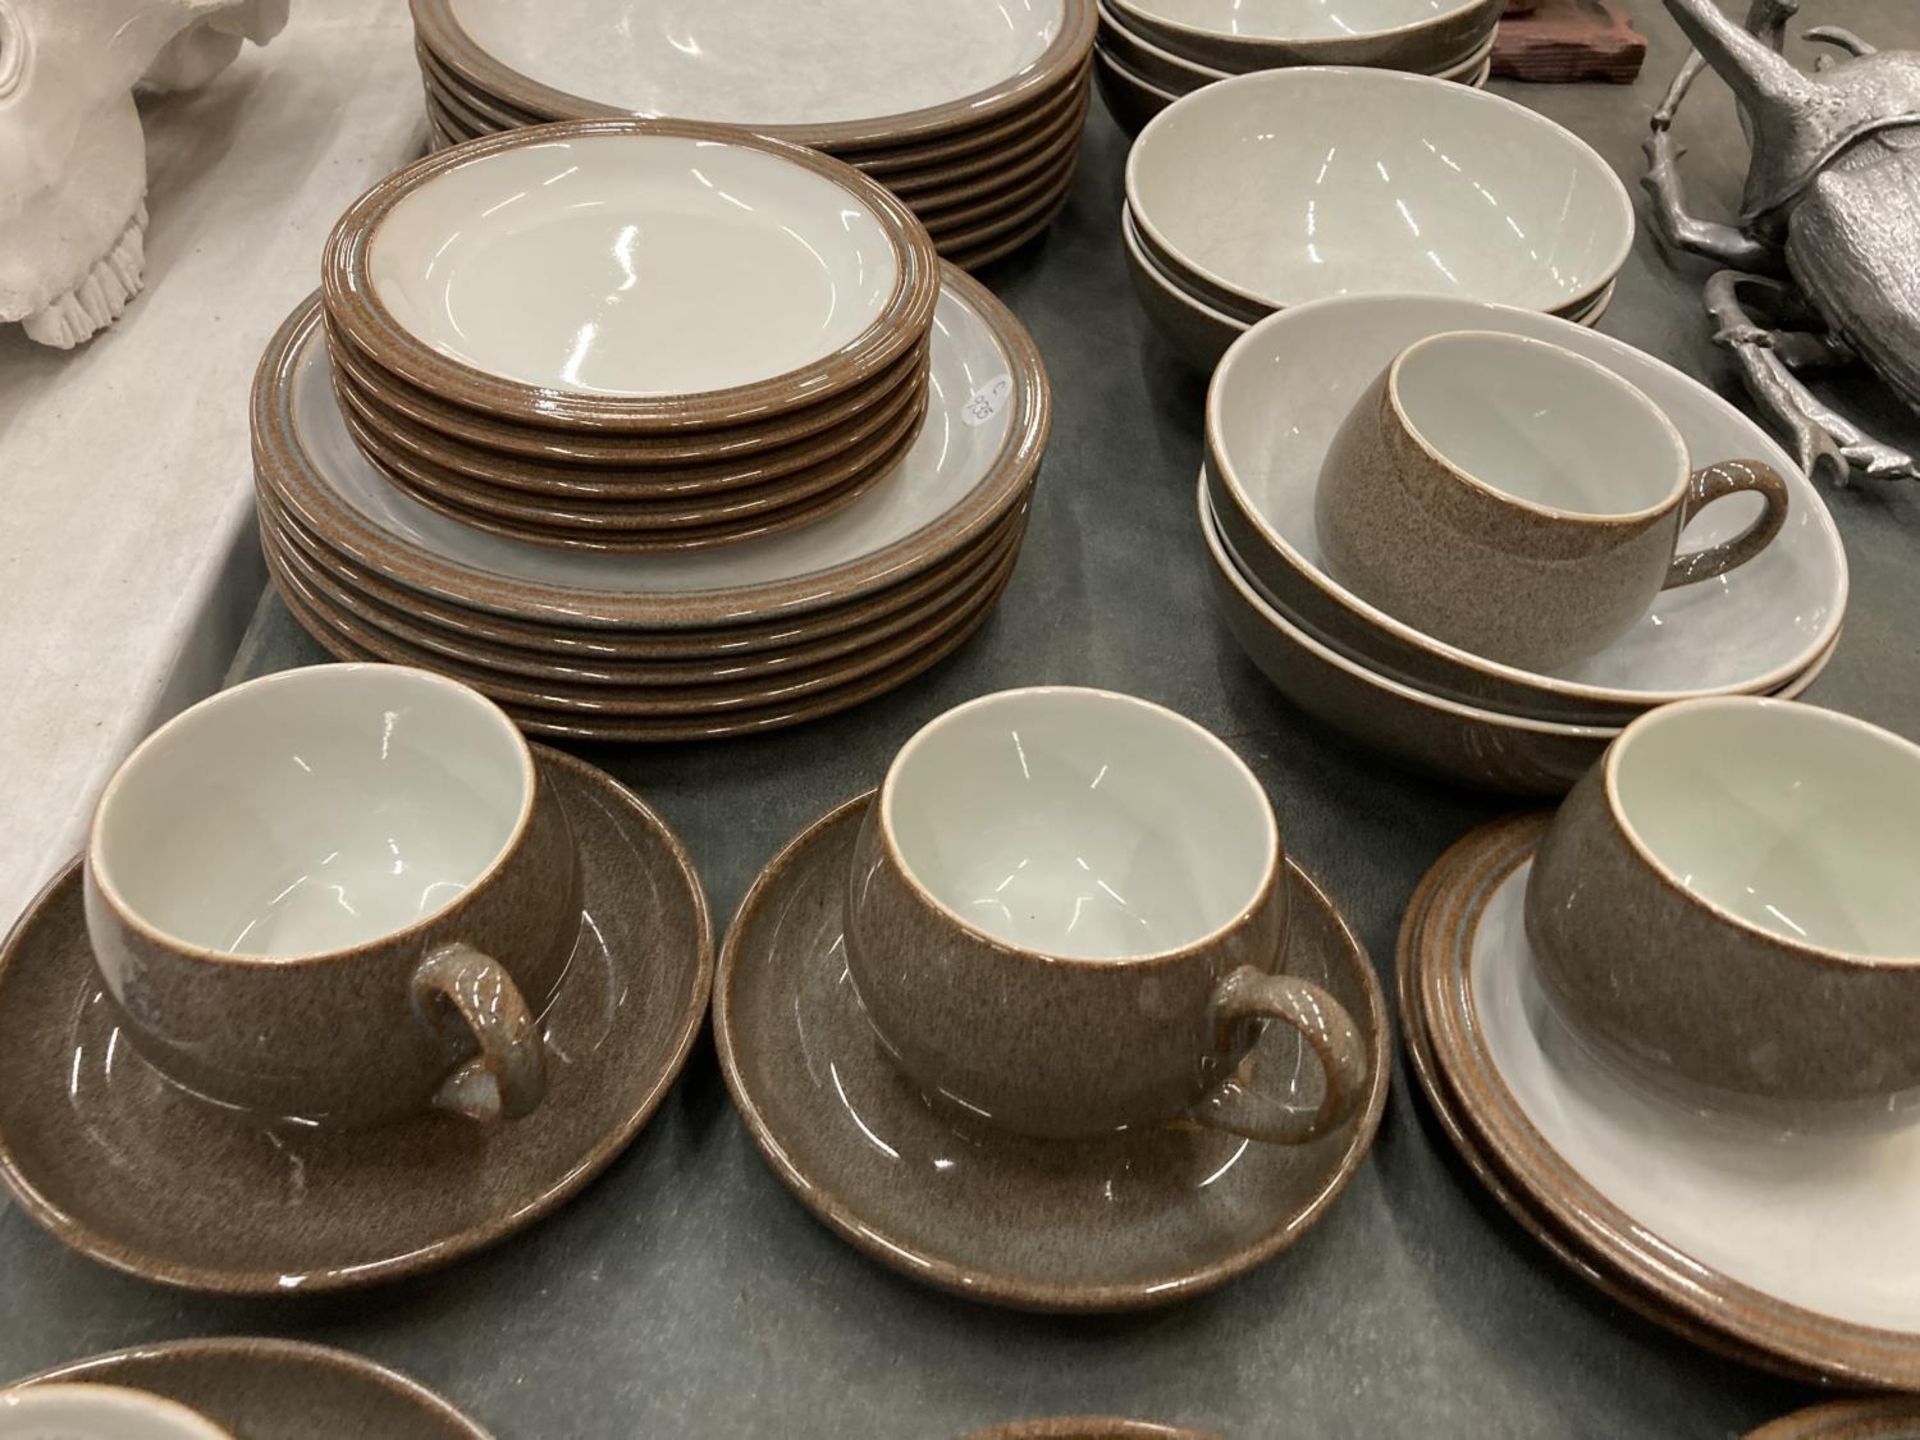 A PART DENBY DINNER SERVICE TO INCLUDE DINNER AND SIDE PLATES, BOWLS, CUPS AND SAUCERS - 33 PIECES - Image 3 of 5